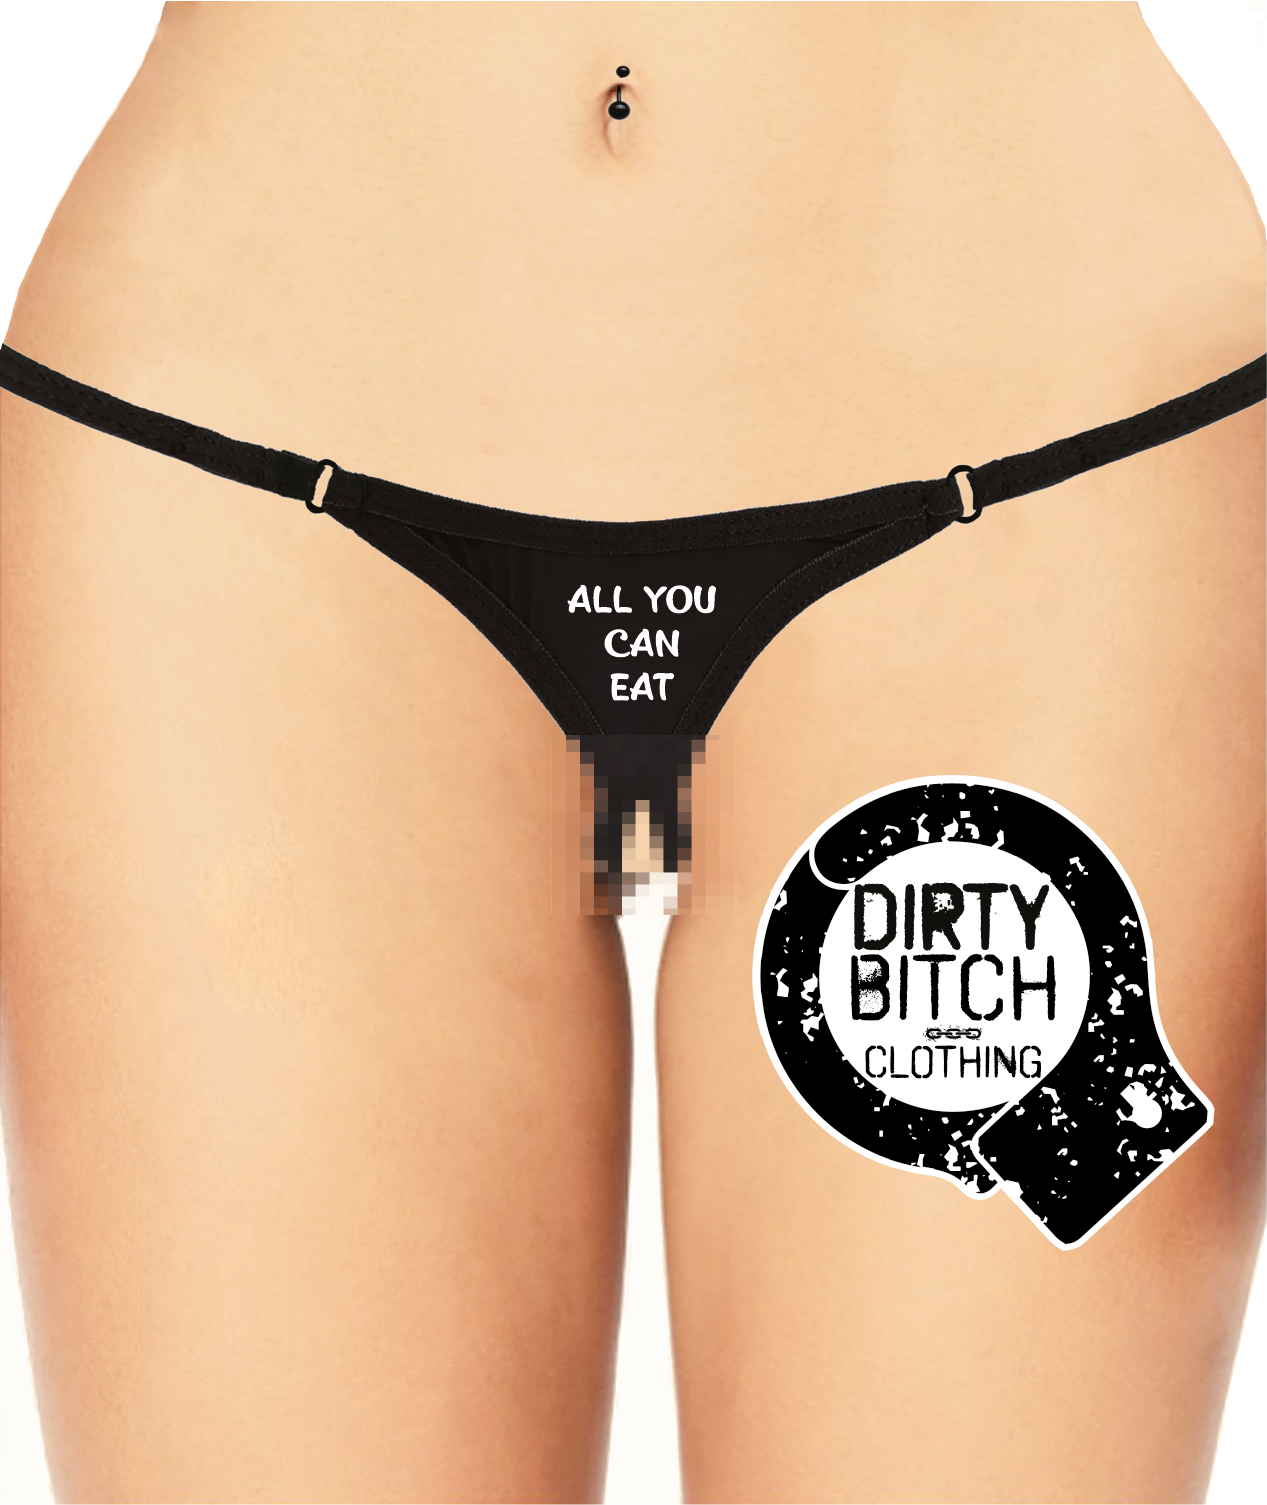 All You Can Eat - Crotchless G-String